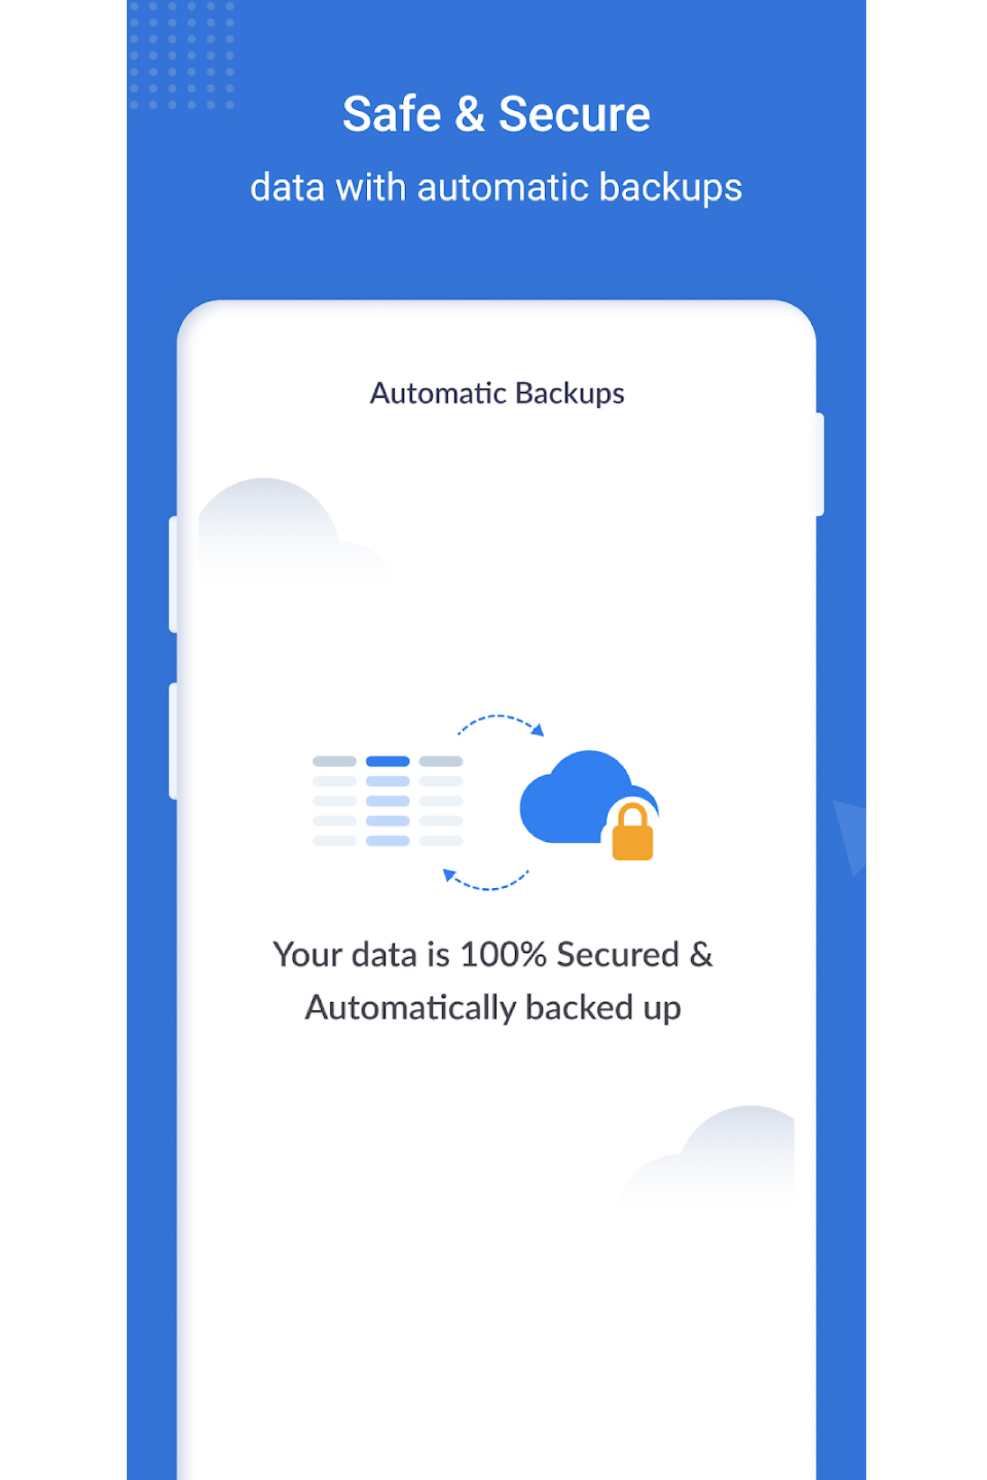 Safe & Secure data with automatic backups.